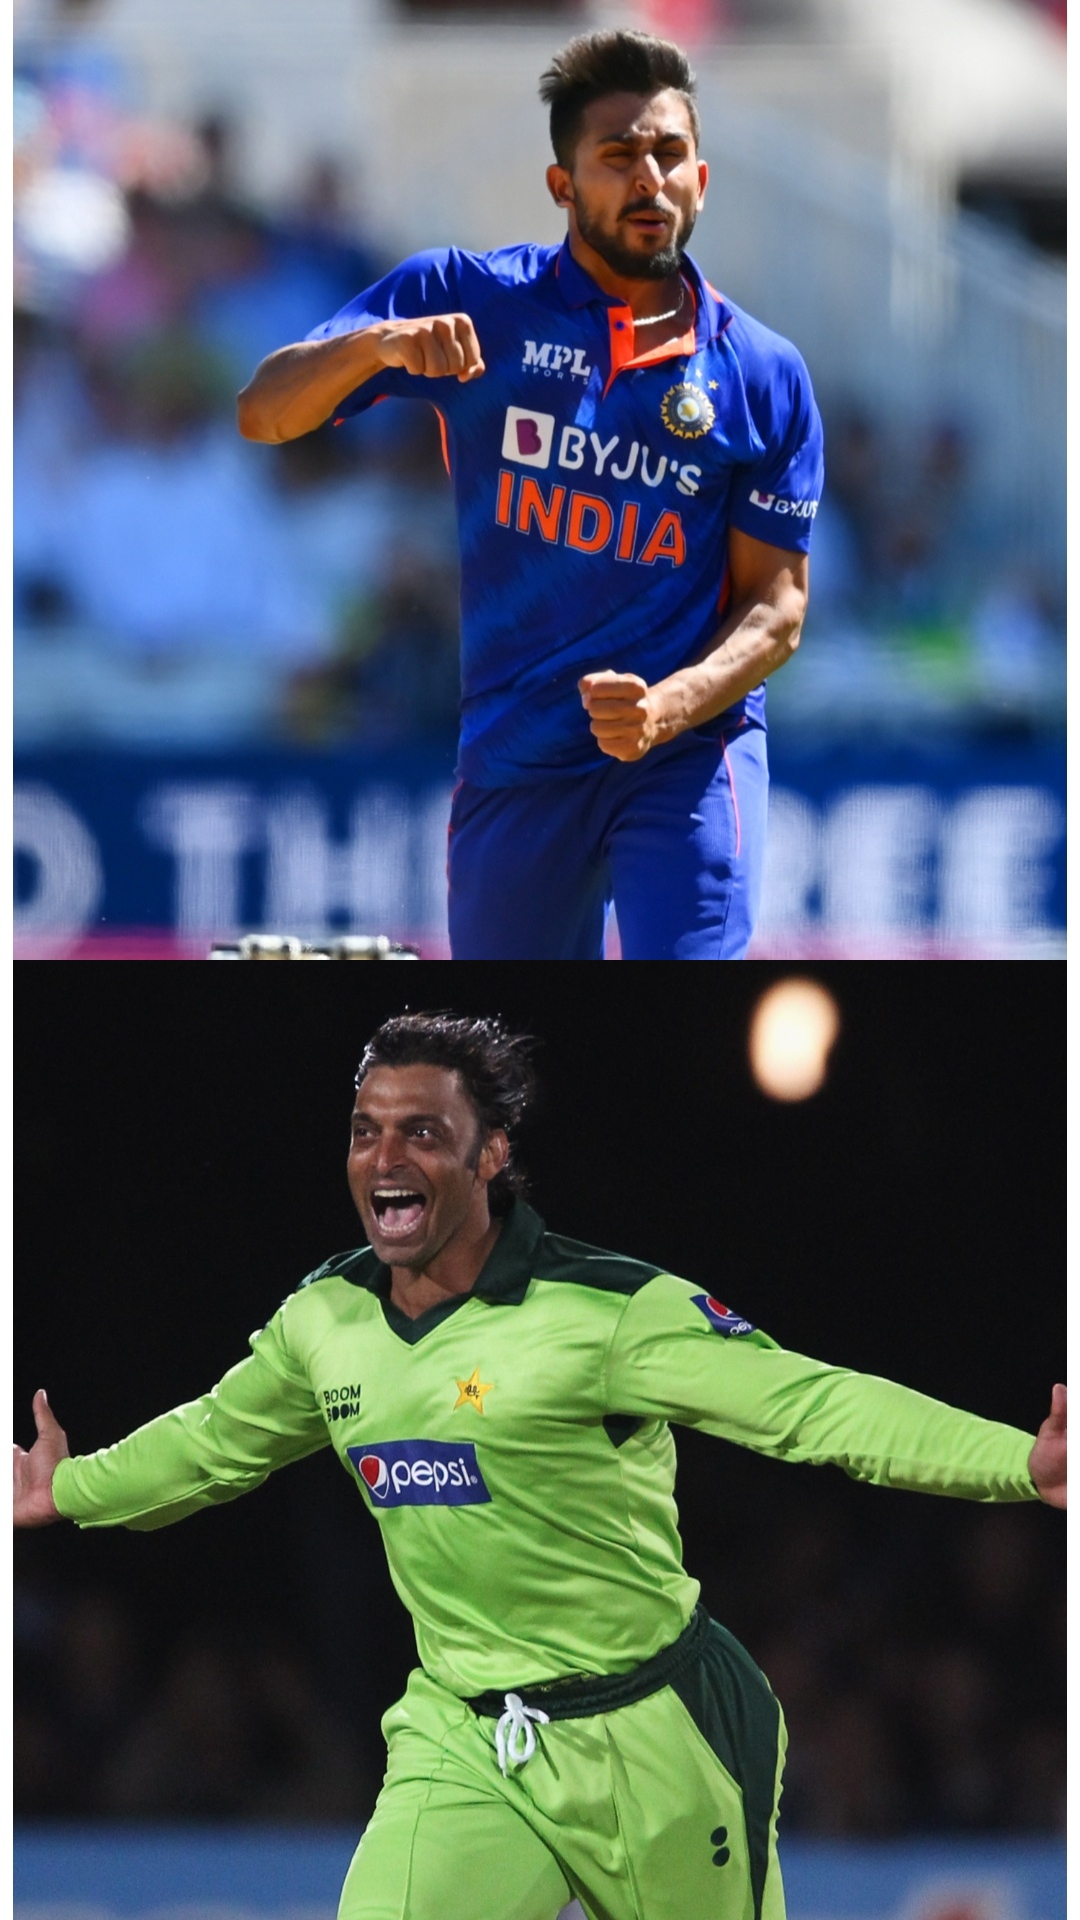 10 players to bowl fastest deliveries in International cricket feat. Umran Malik and Shoaib Akhtar